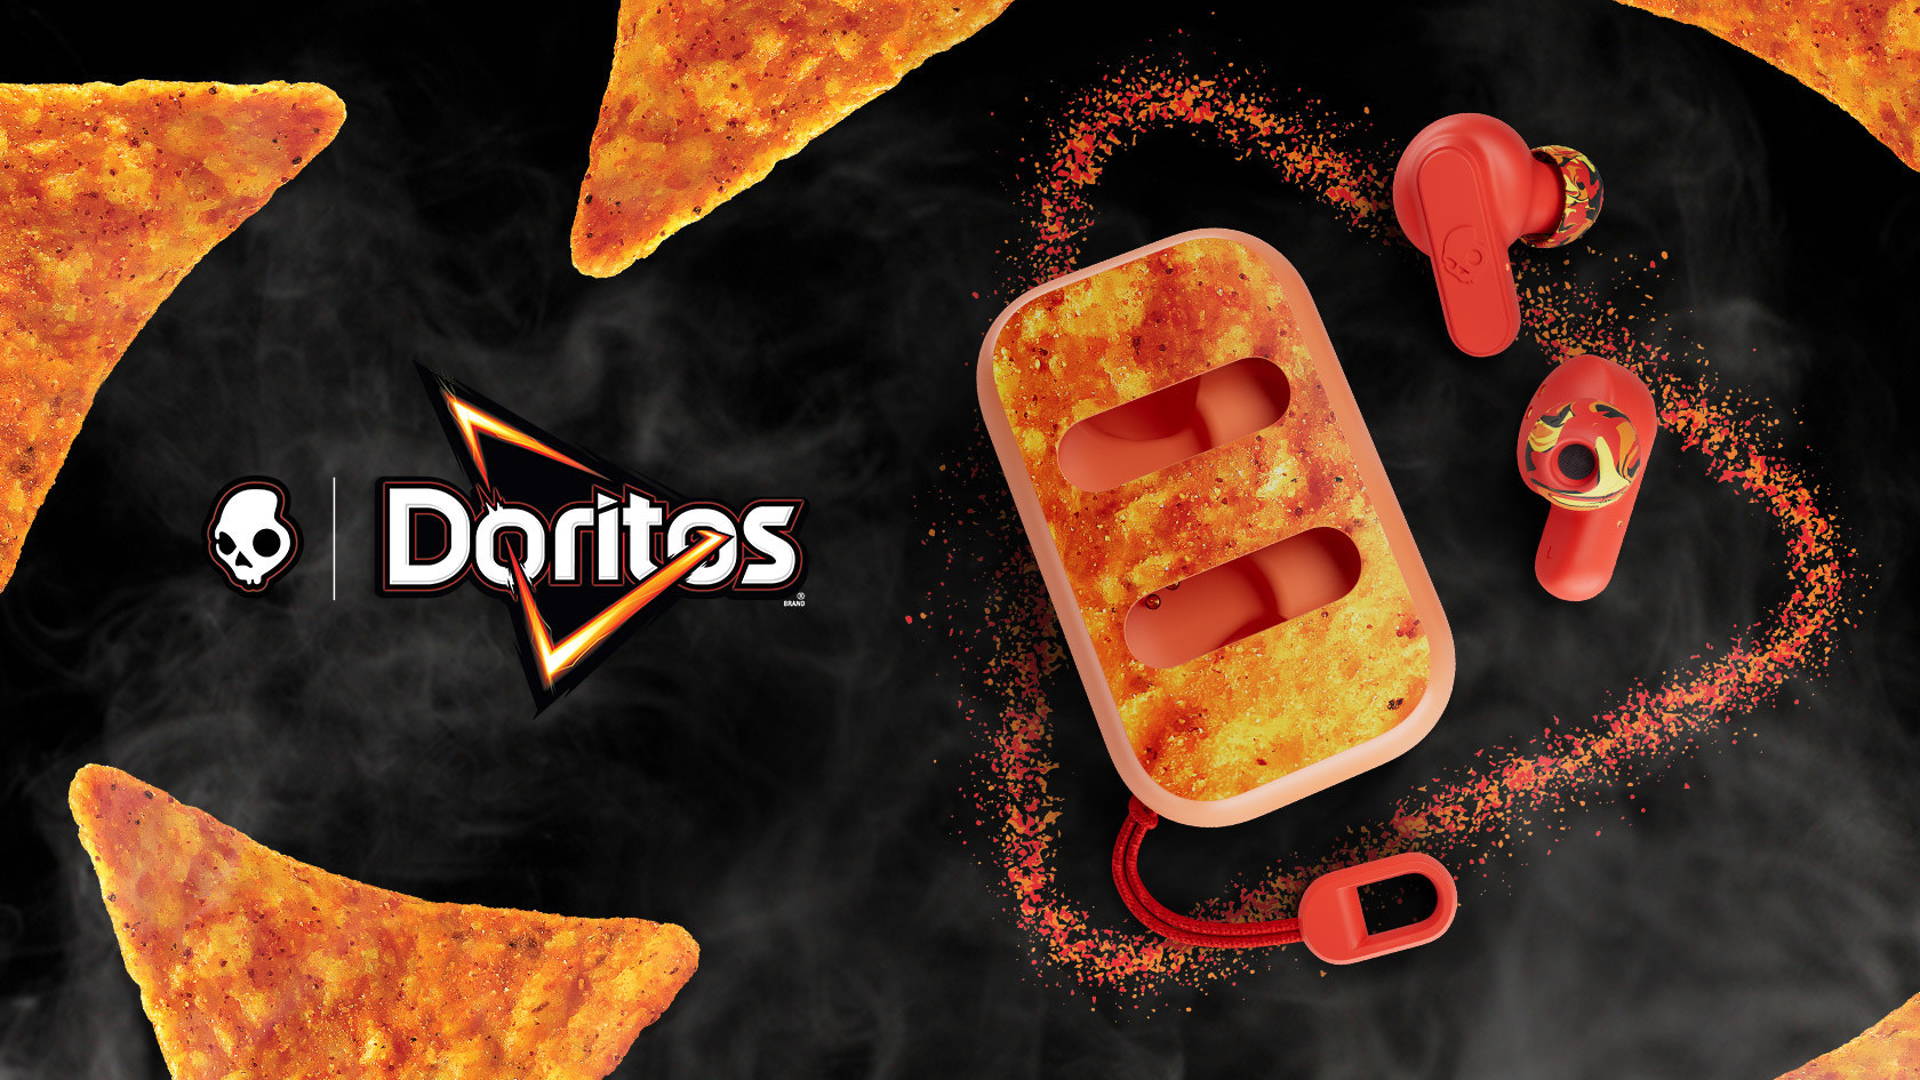 A picture of some taco's and headphones - Doritos